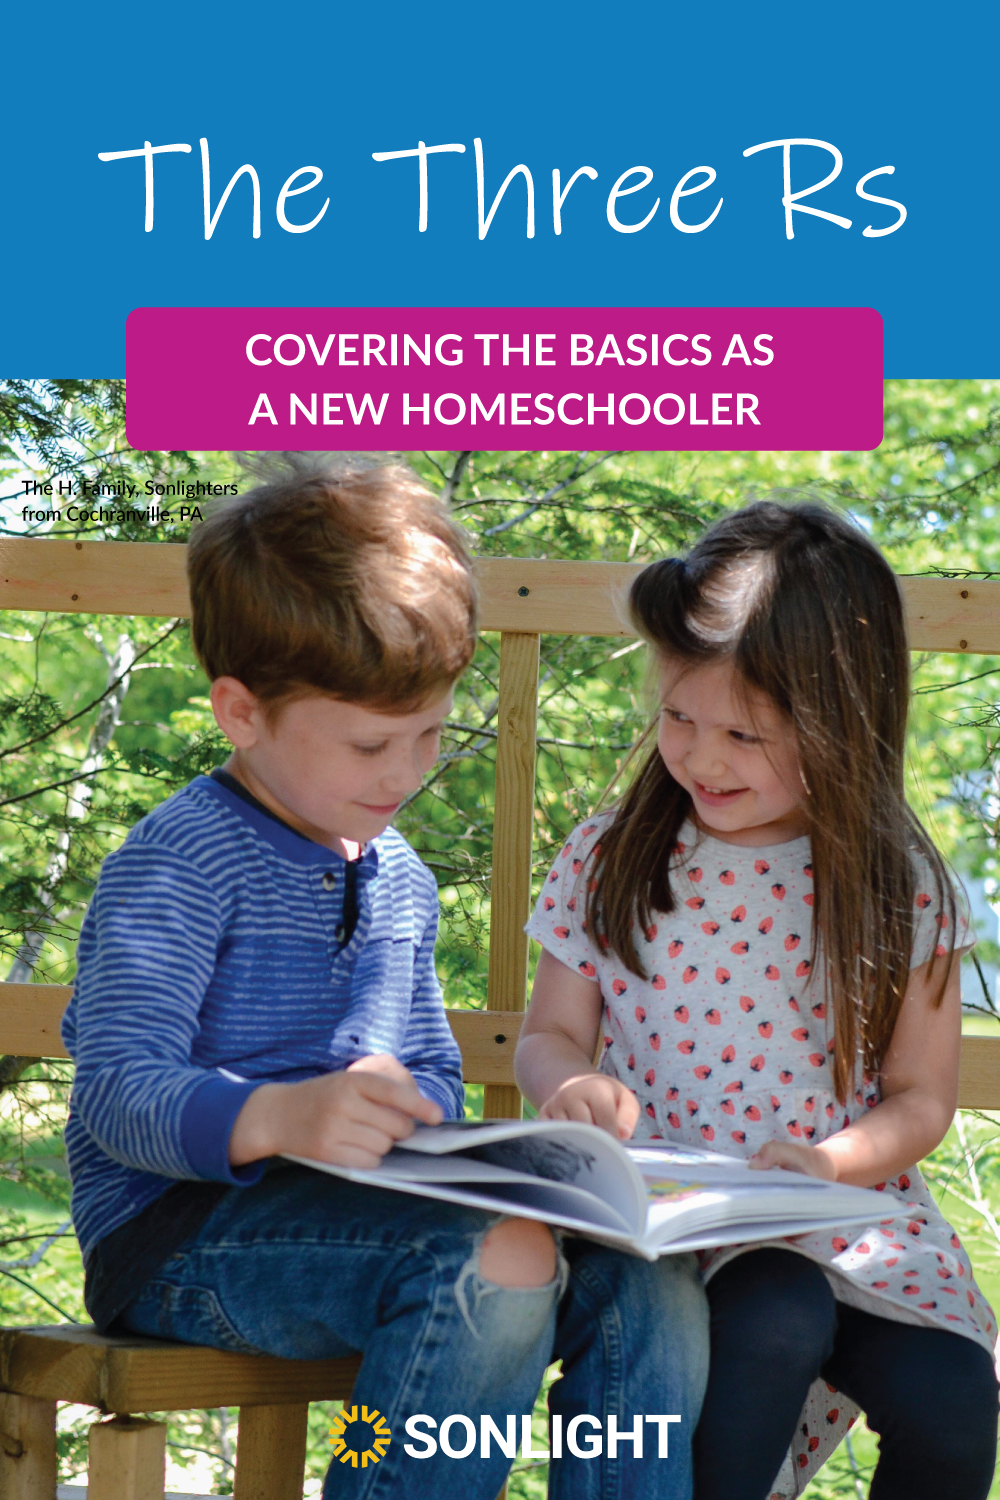 The Three Rs: Covering the Basics as a New Homeschooler